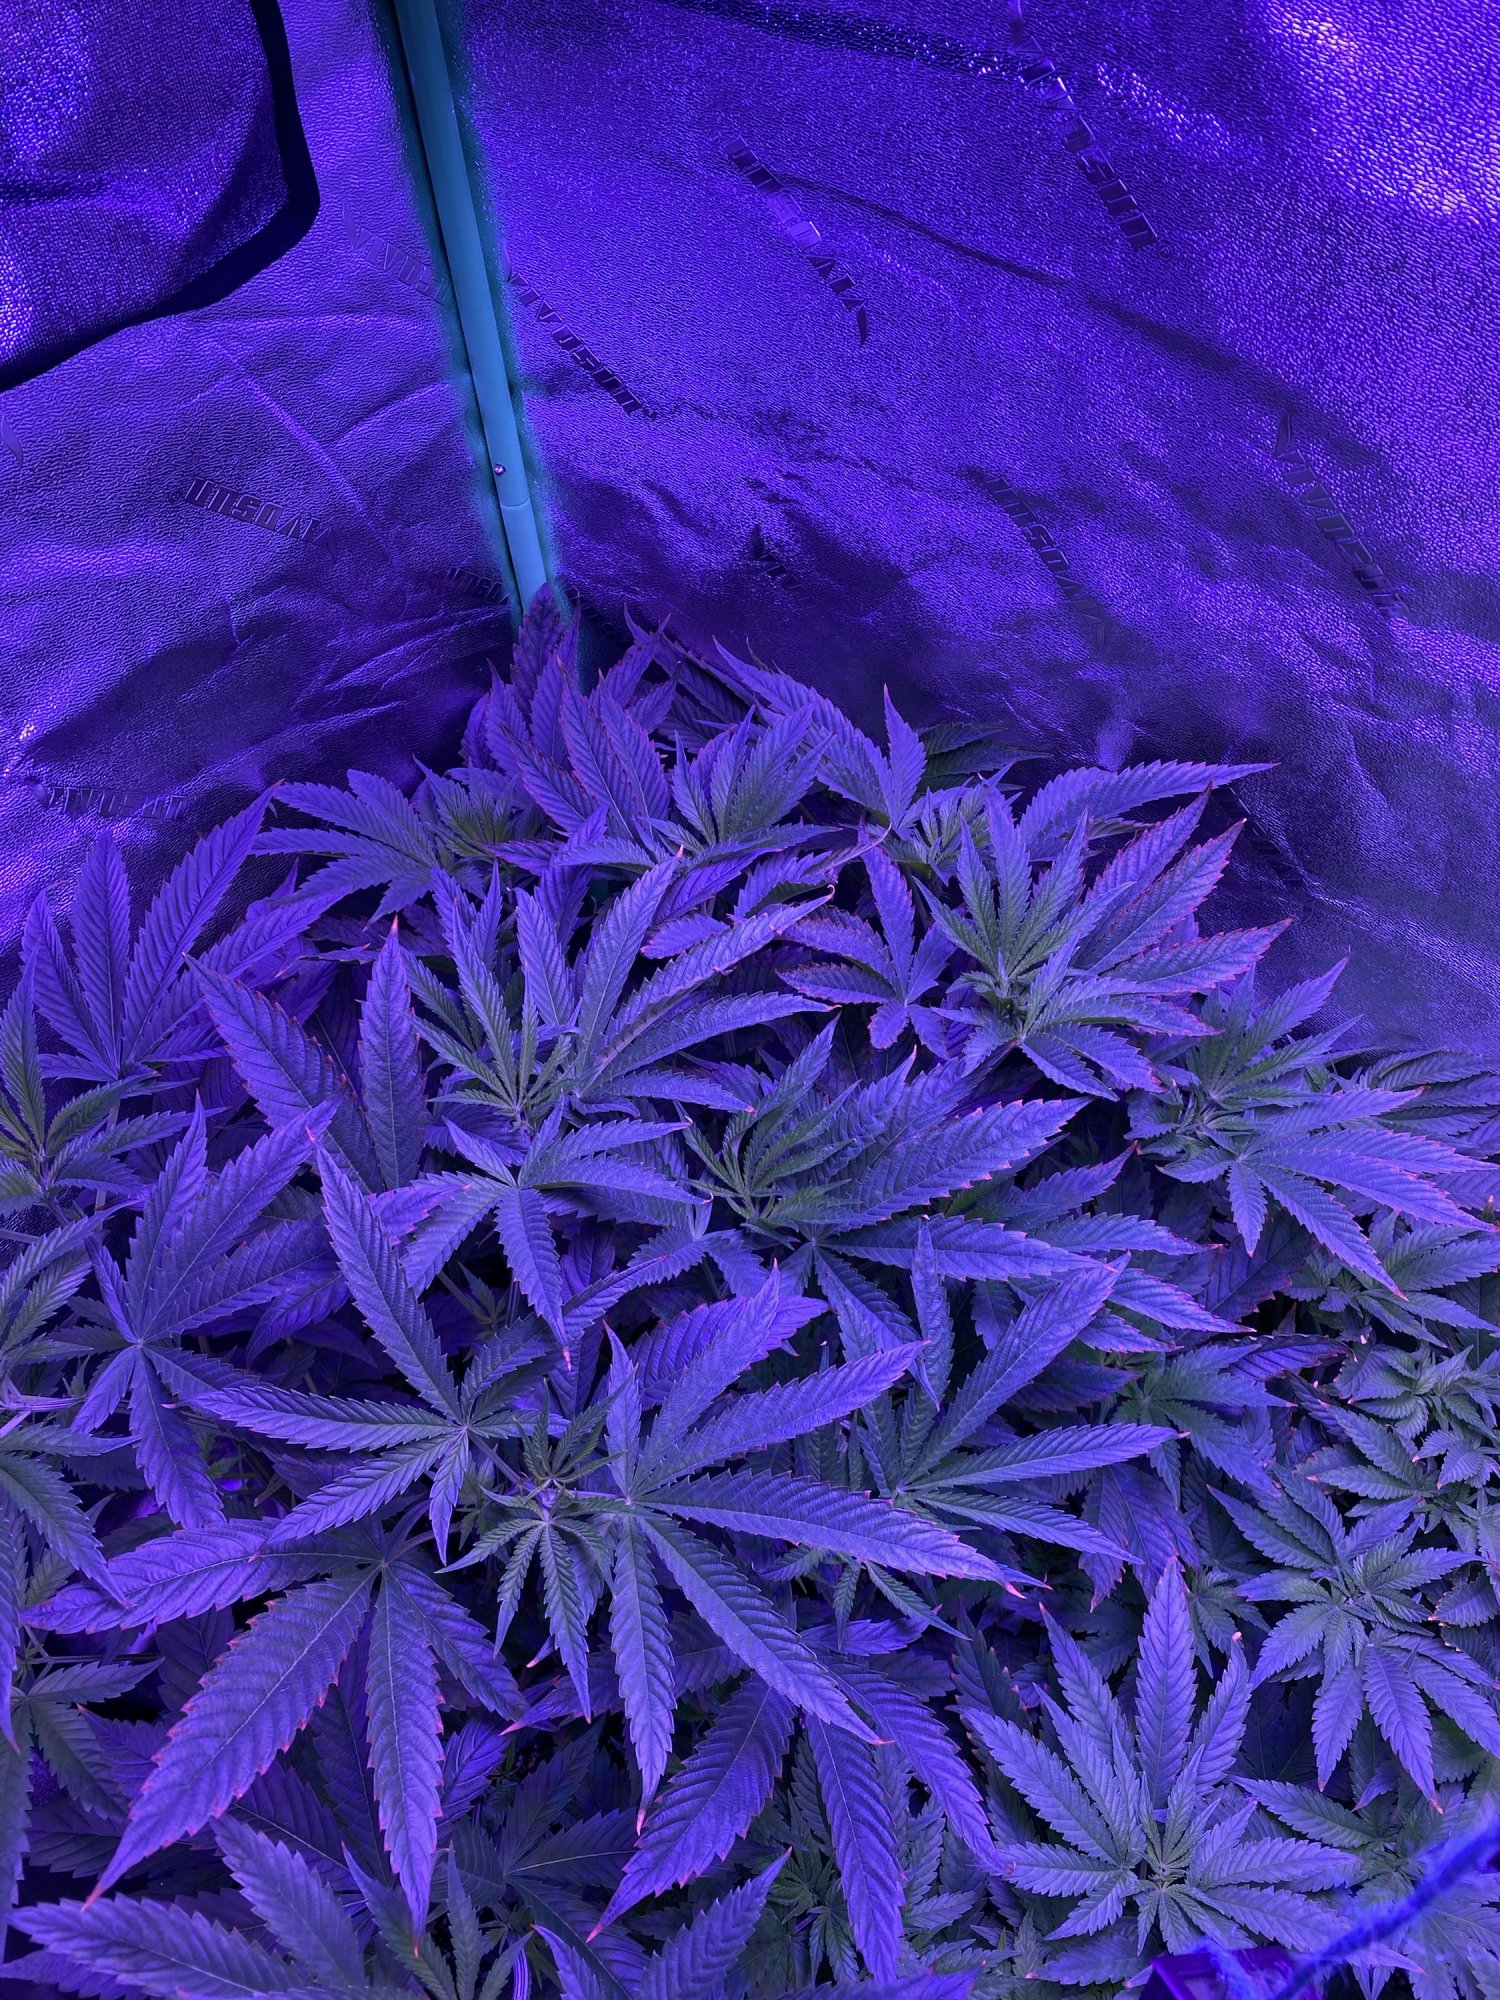 Heat stress and nute burn advice please